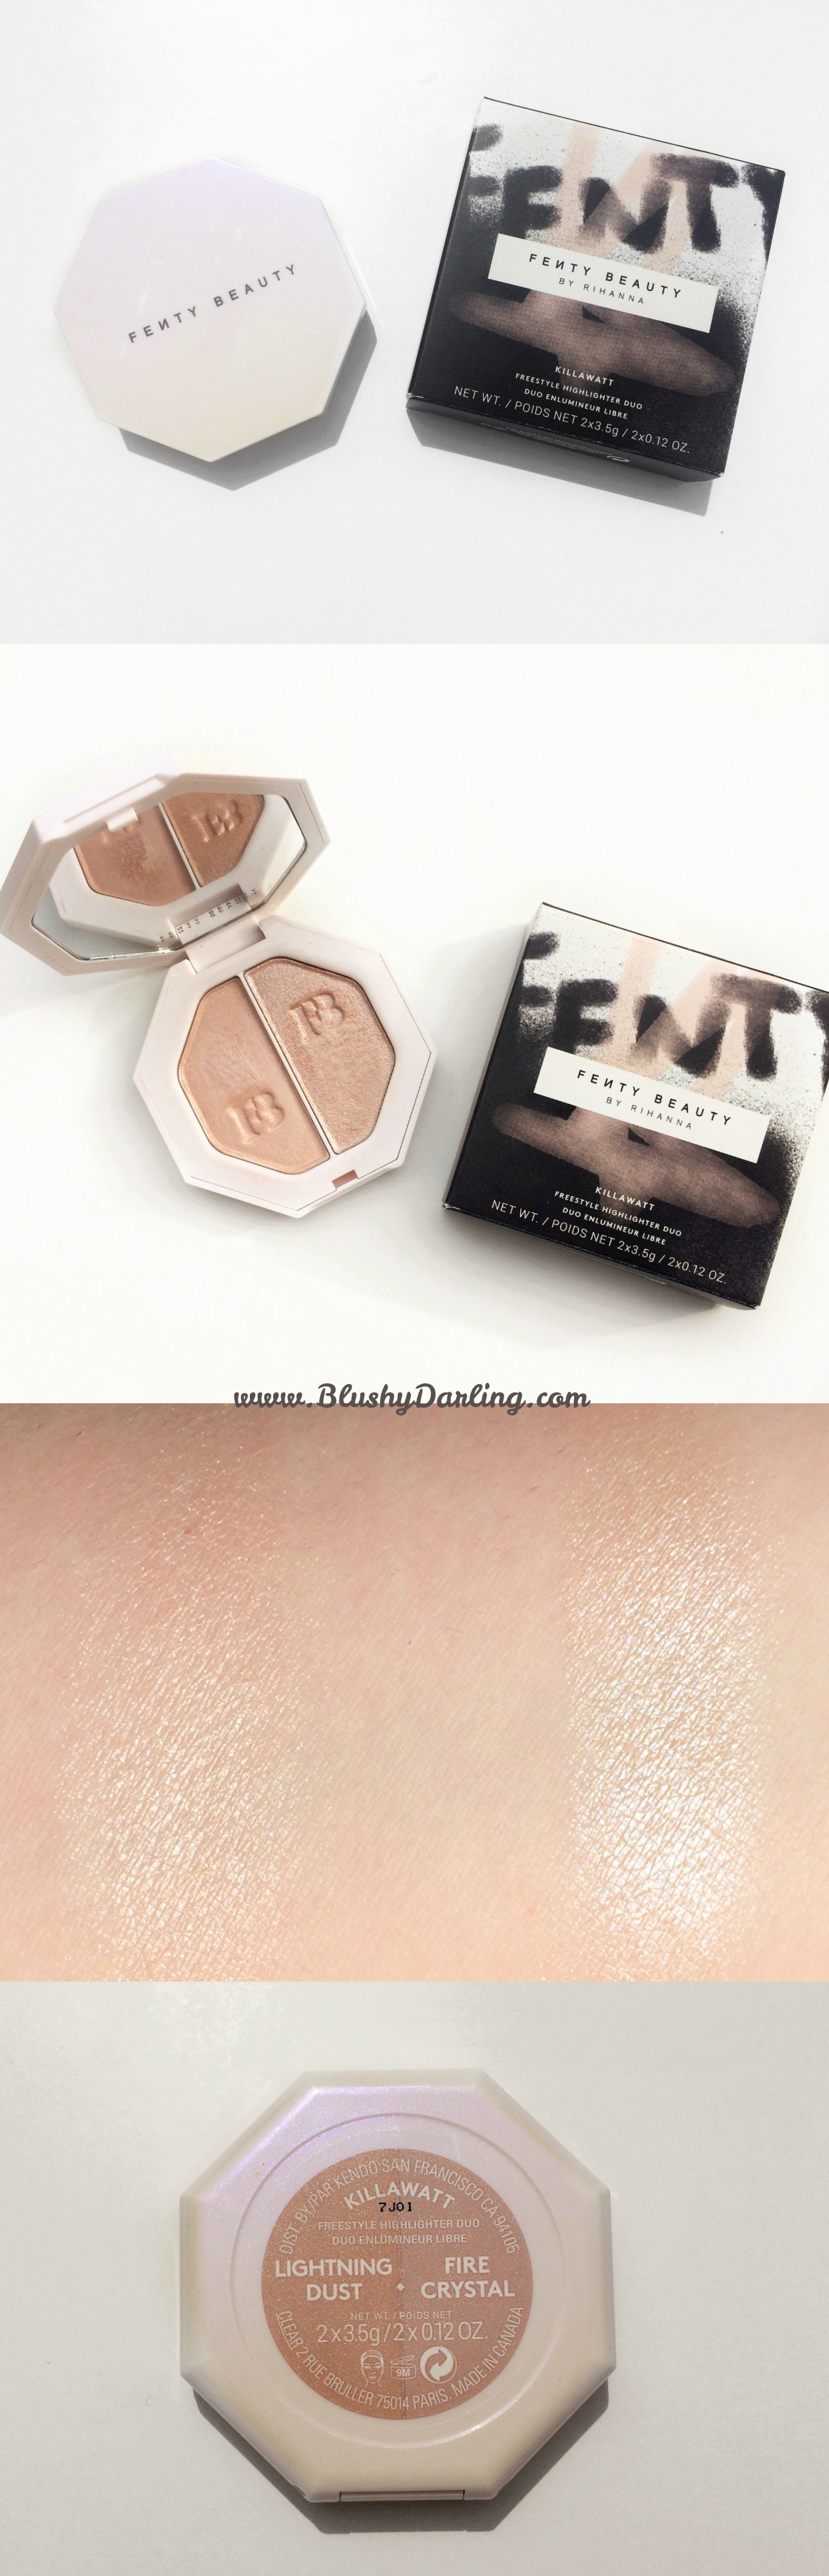 Fenty Beauty Highlighter Swatch and Review. Is this highlighther worth the hype? #makeup